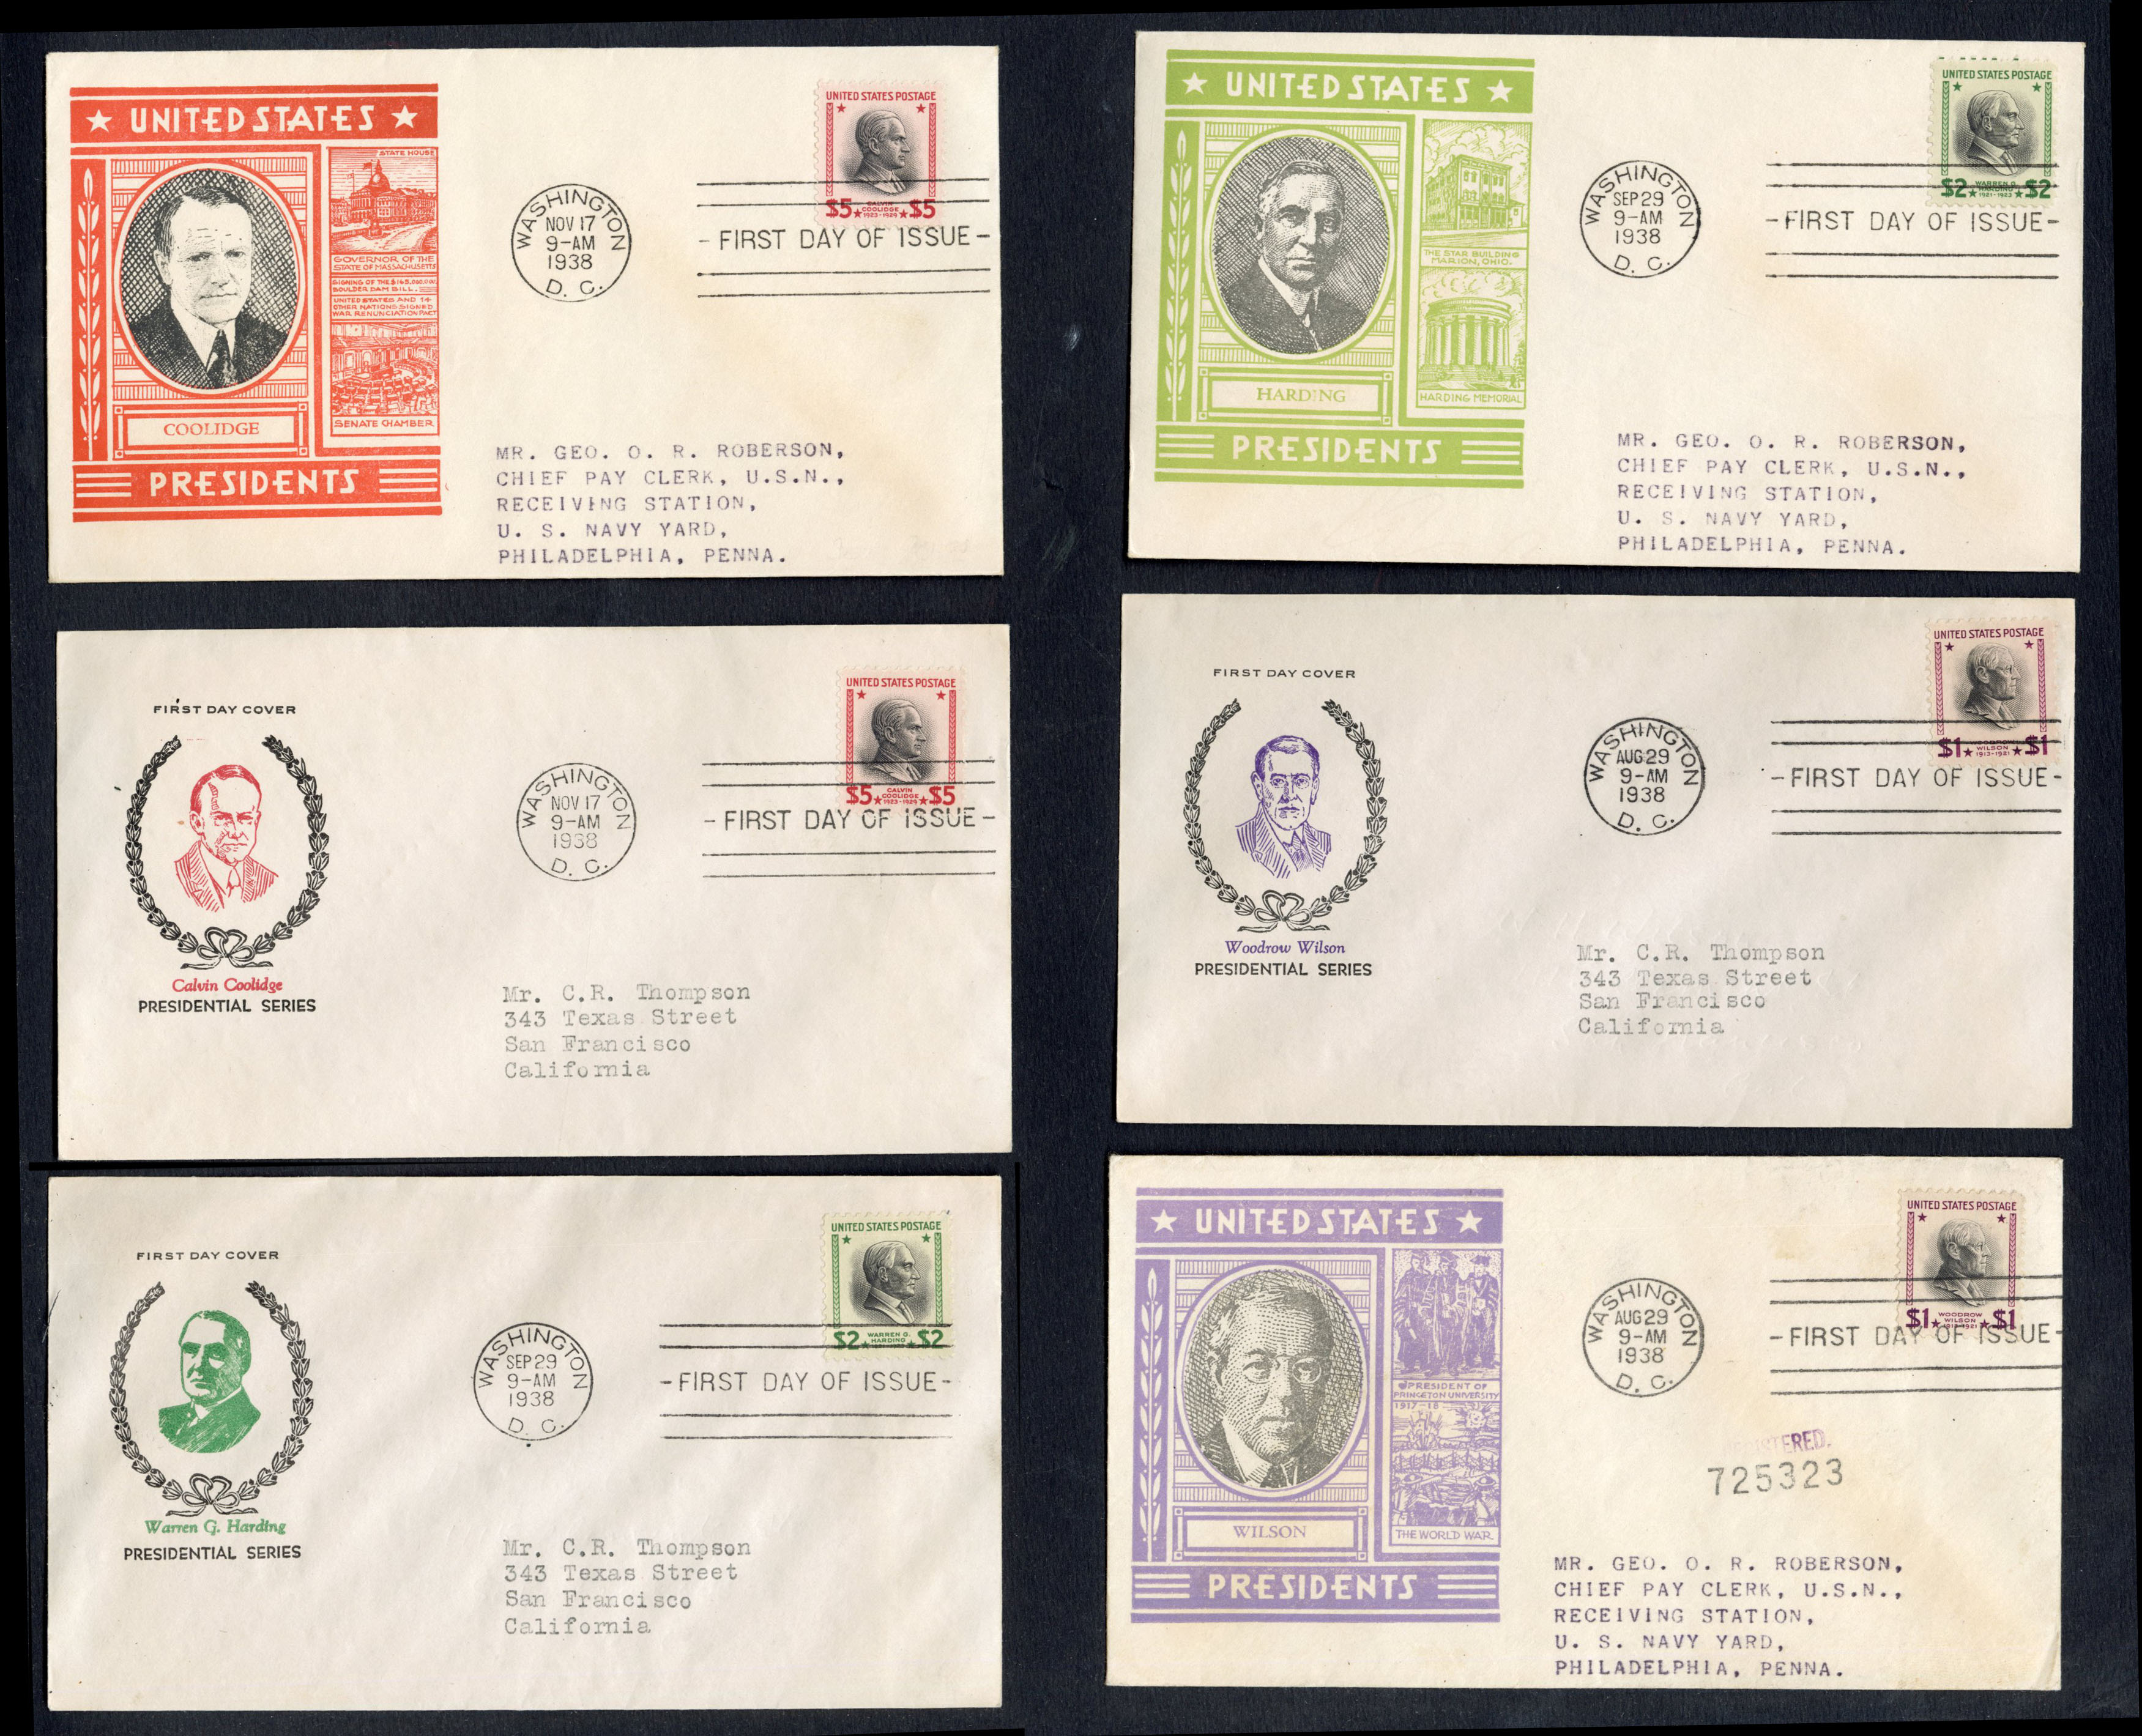 Lot 124 - United States Modern Issues  -  Cherrystone Auctions U.S. & Worldwide Stamps & Postal History